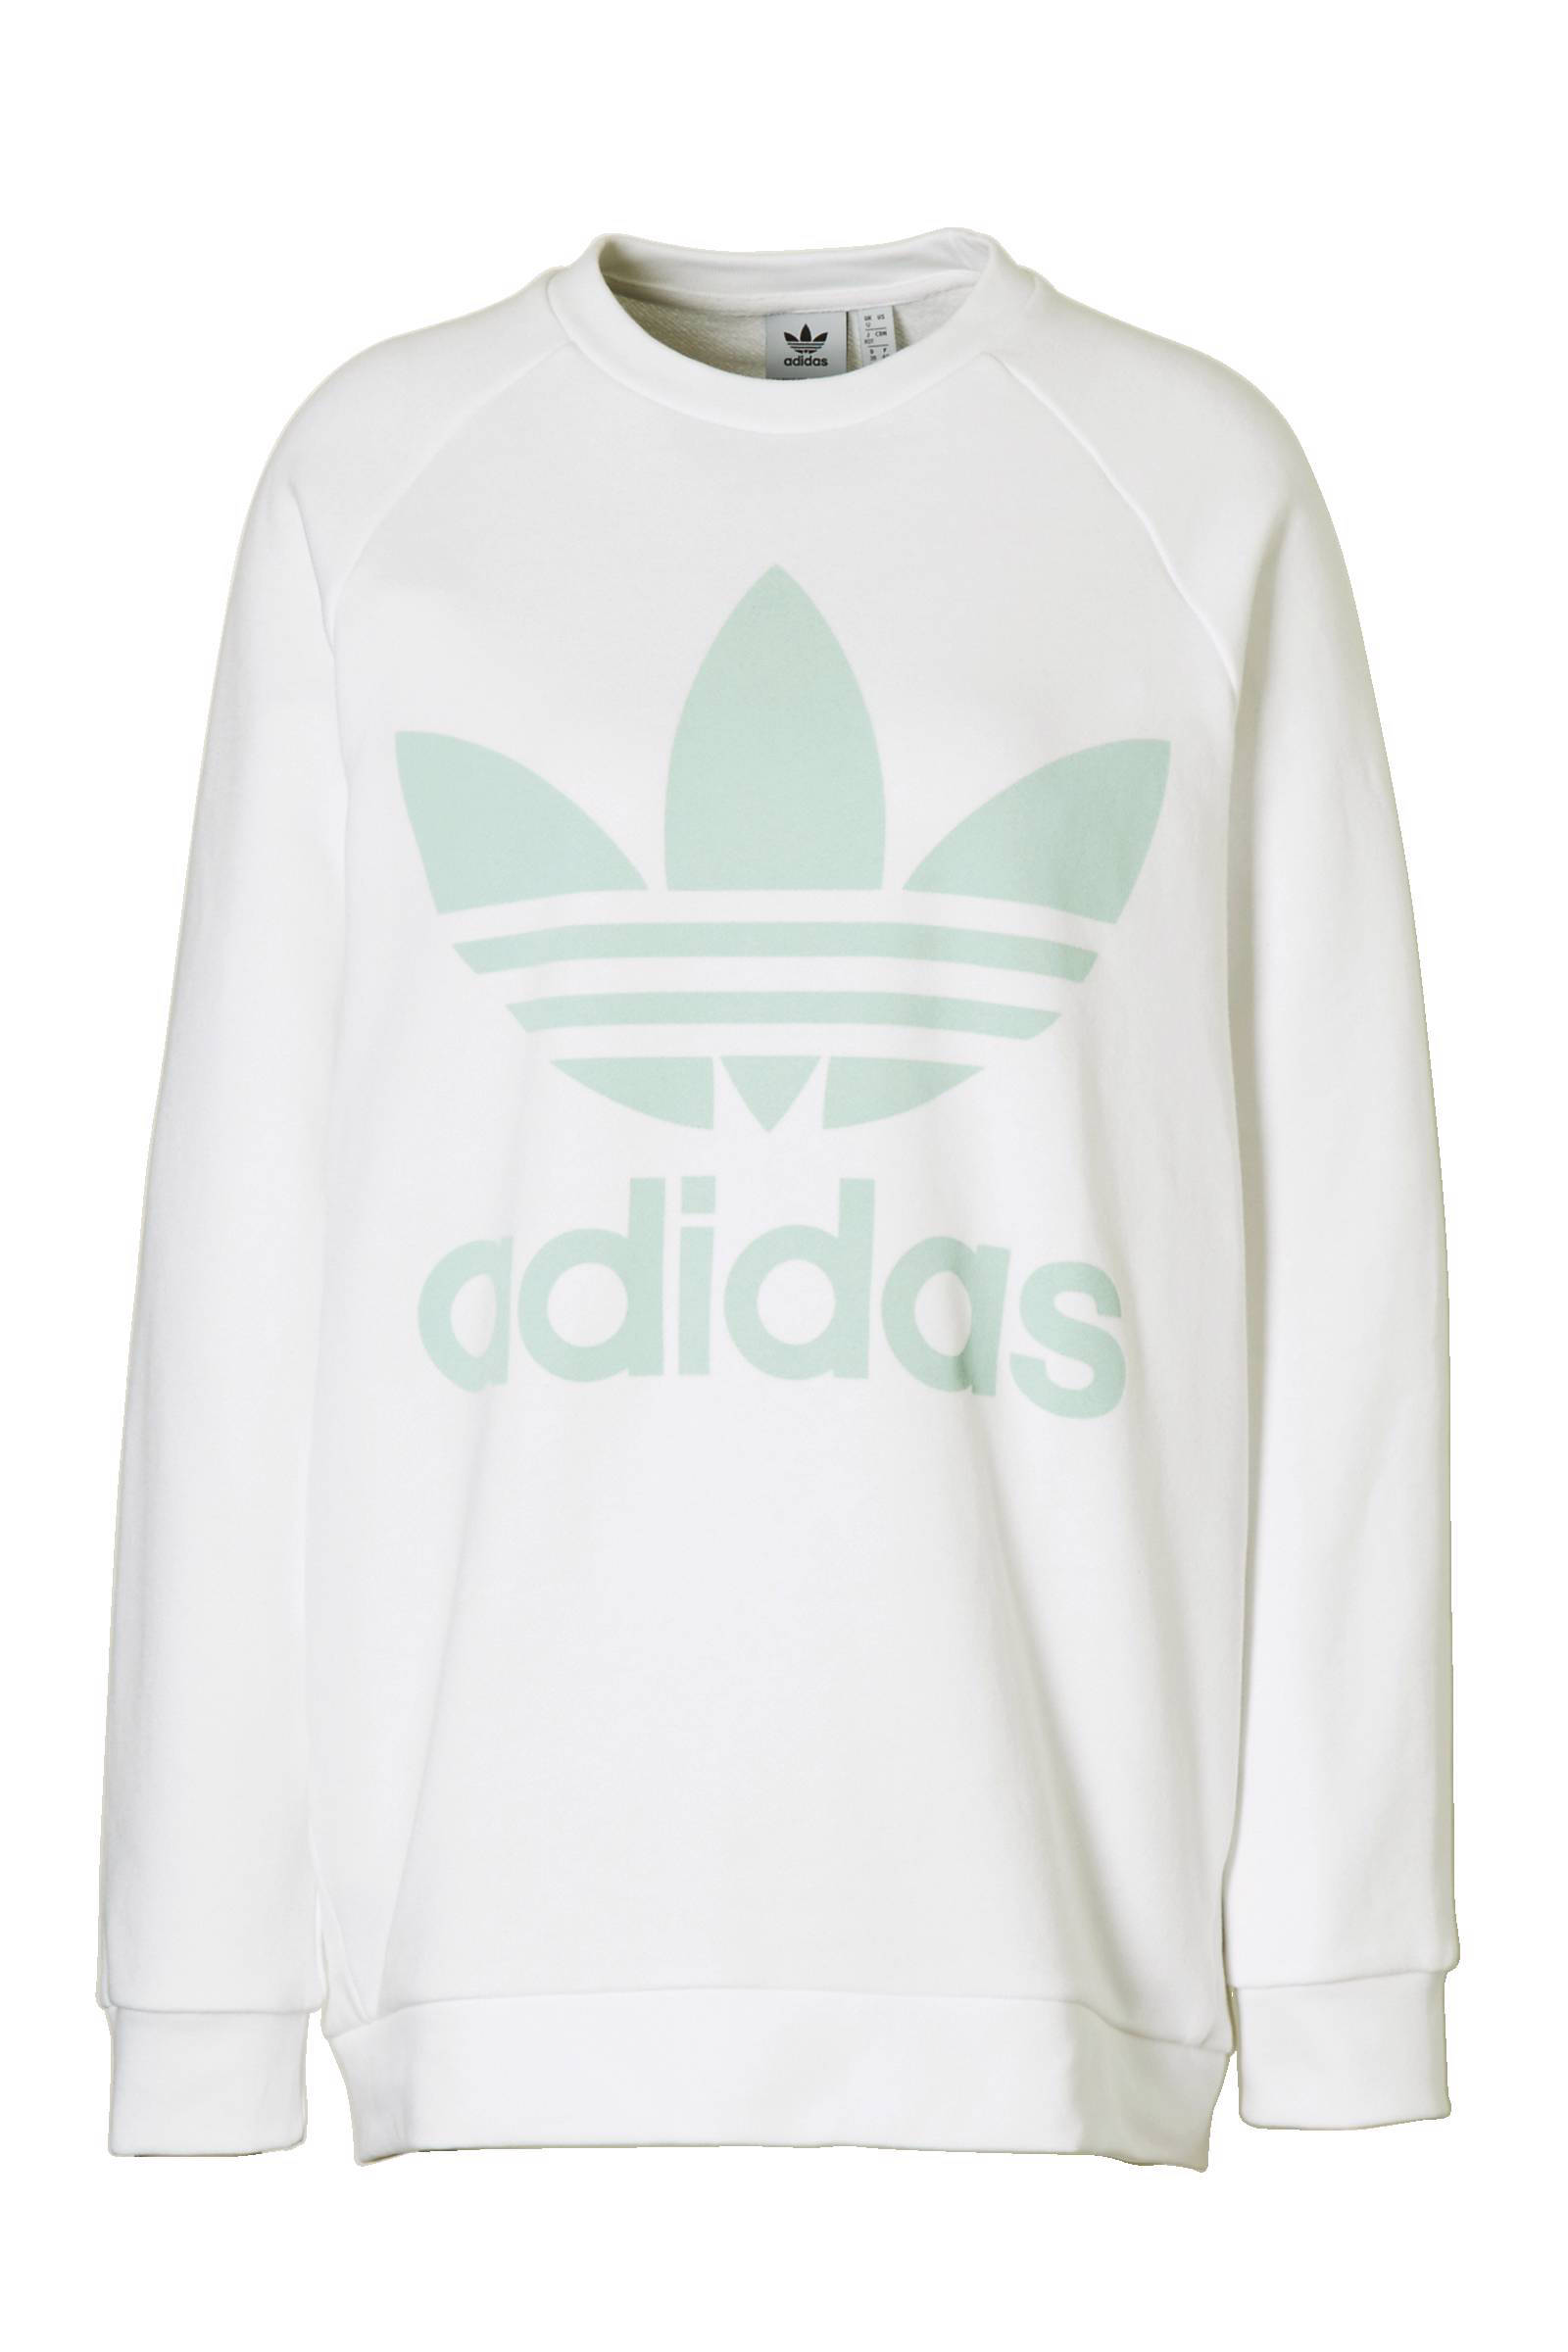 adidas sweater dames sale Off 57% - www.bashhguidelines.org